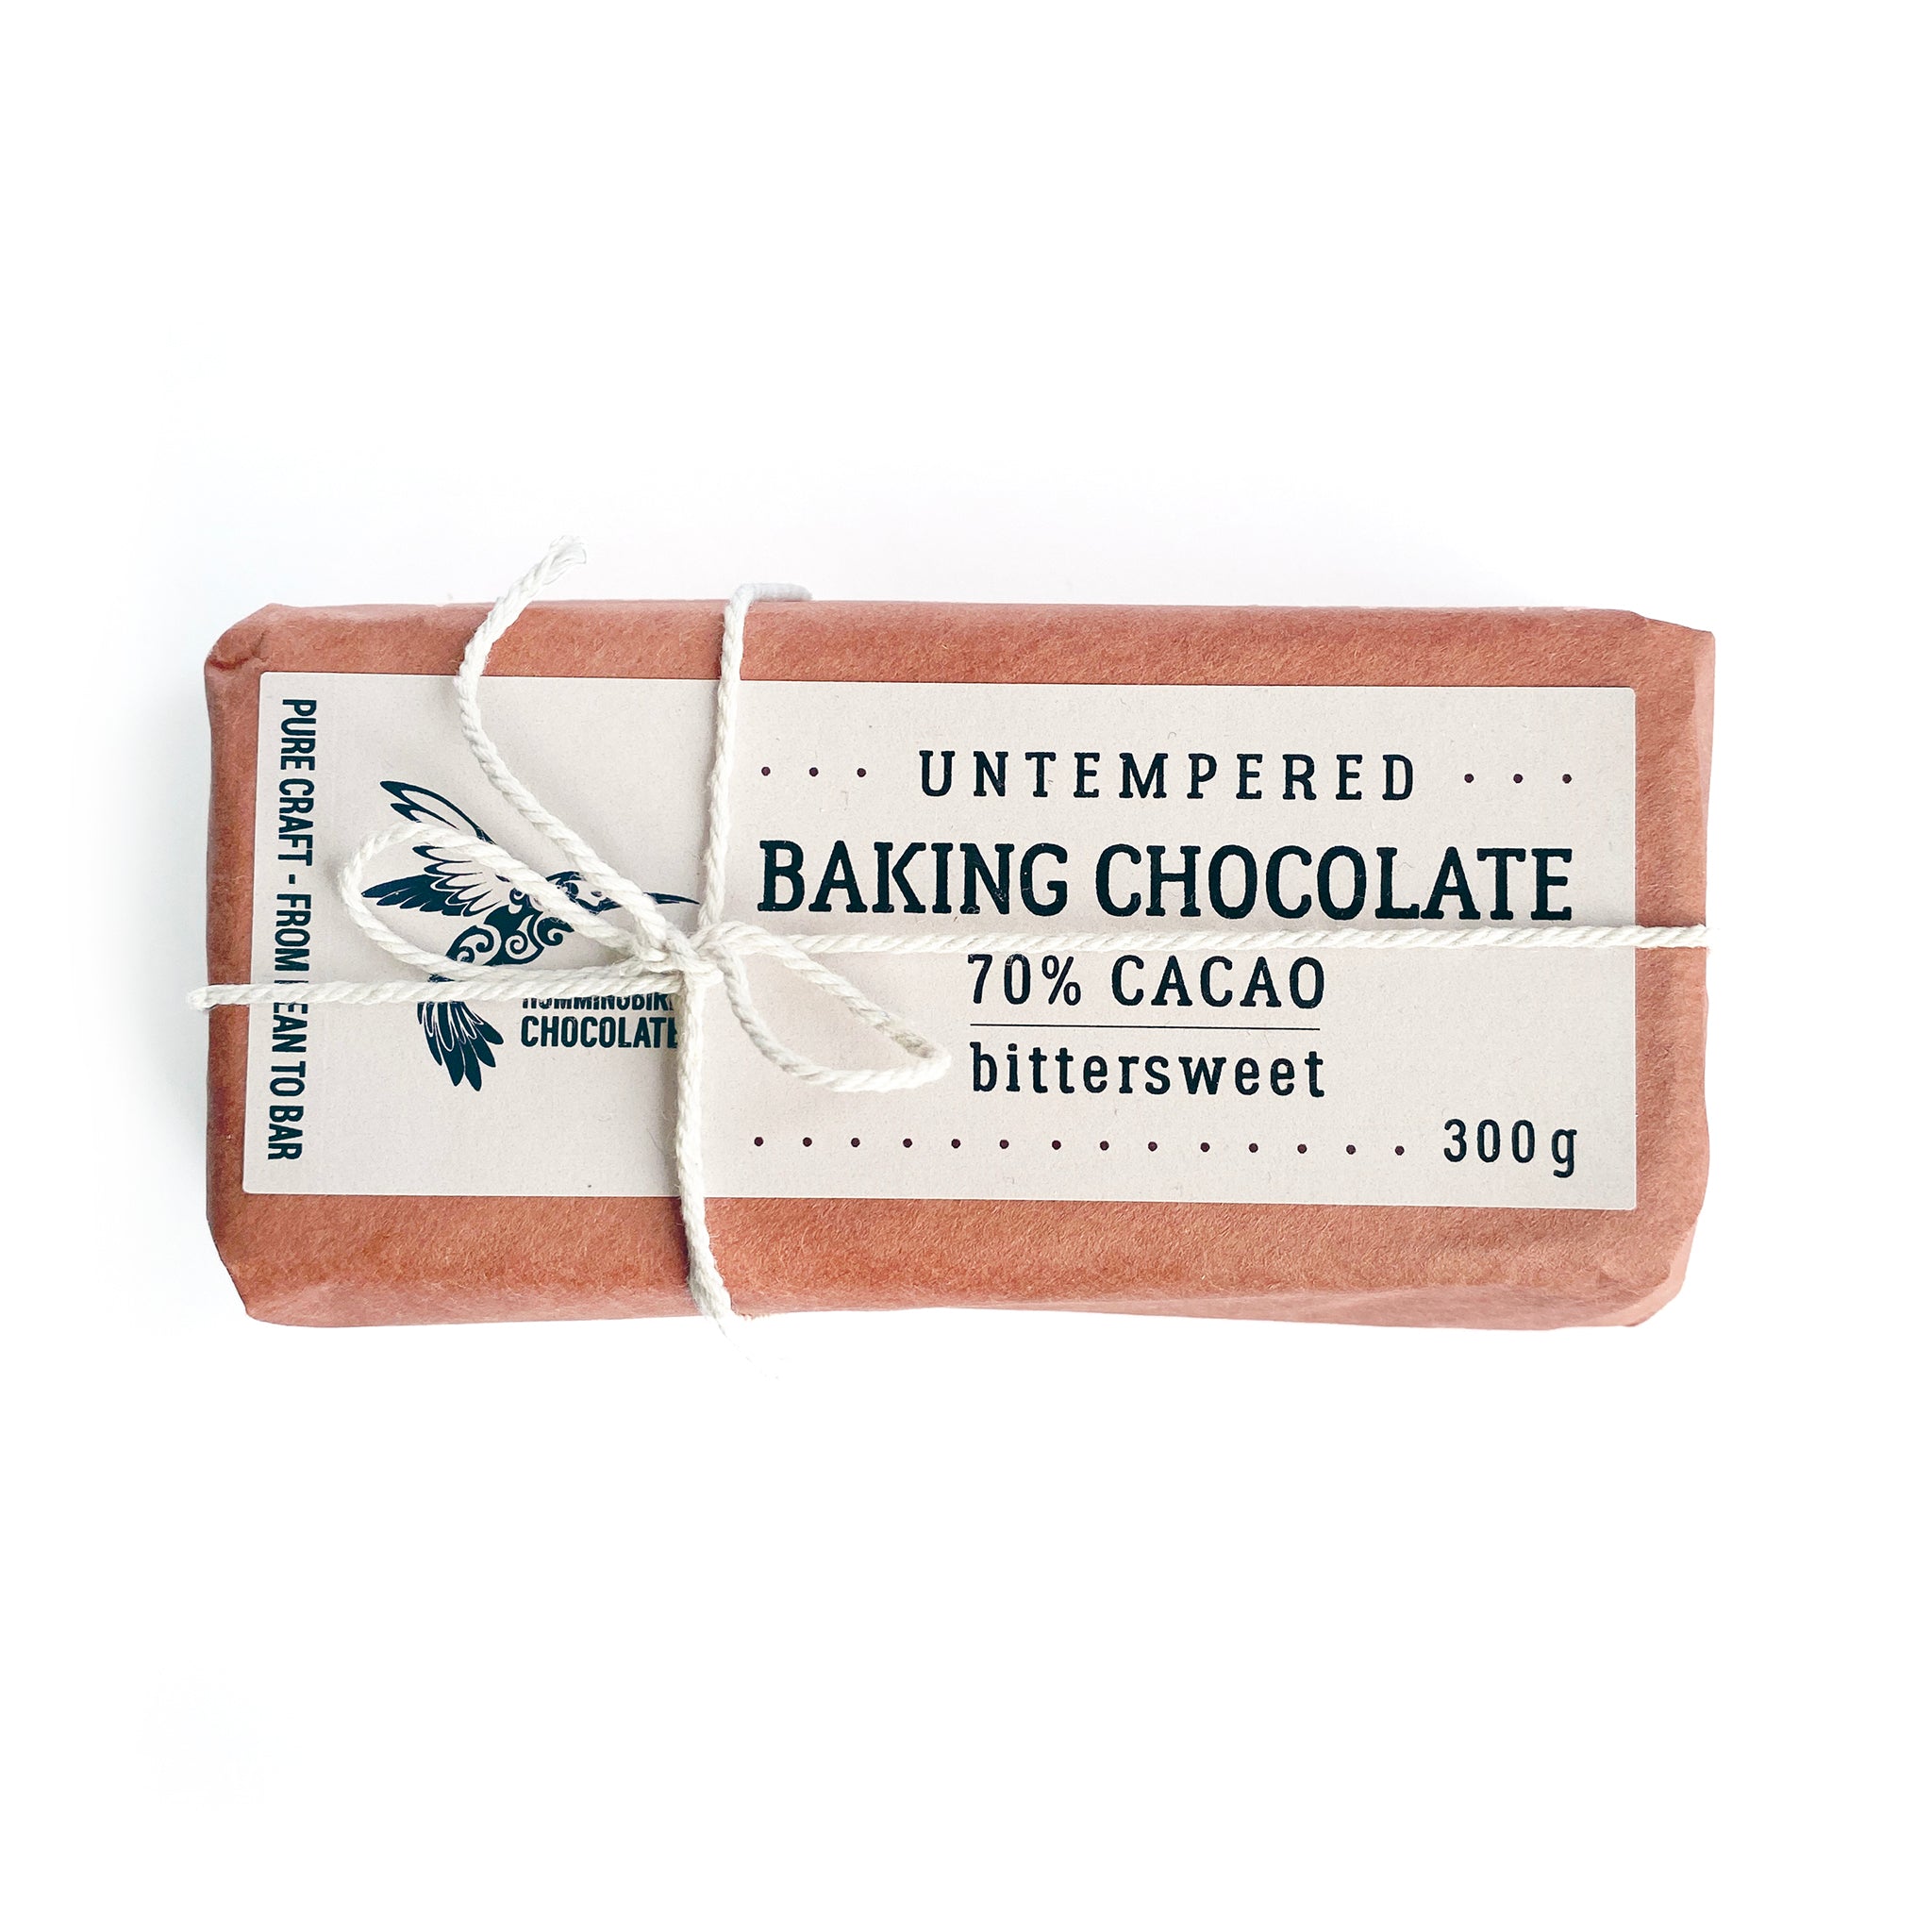 Hummingbird Chocolate, Untempered Baking Chocolate Brick, 70% (bittersweet) Dark chocolate 300g. Wrapped in butchers paper and string.